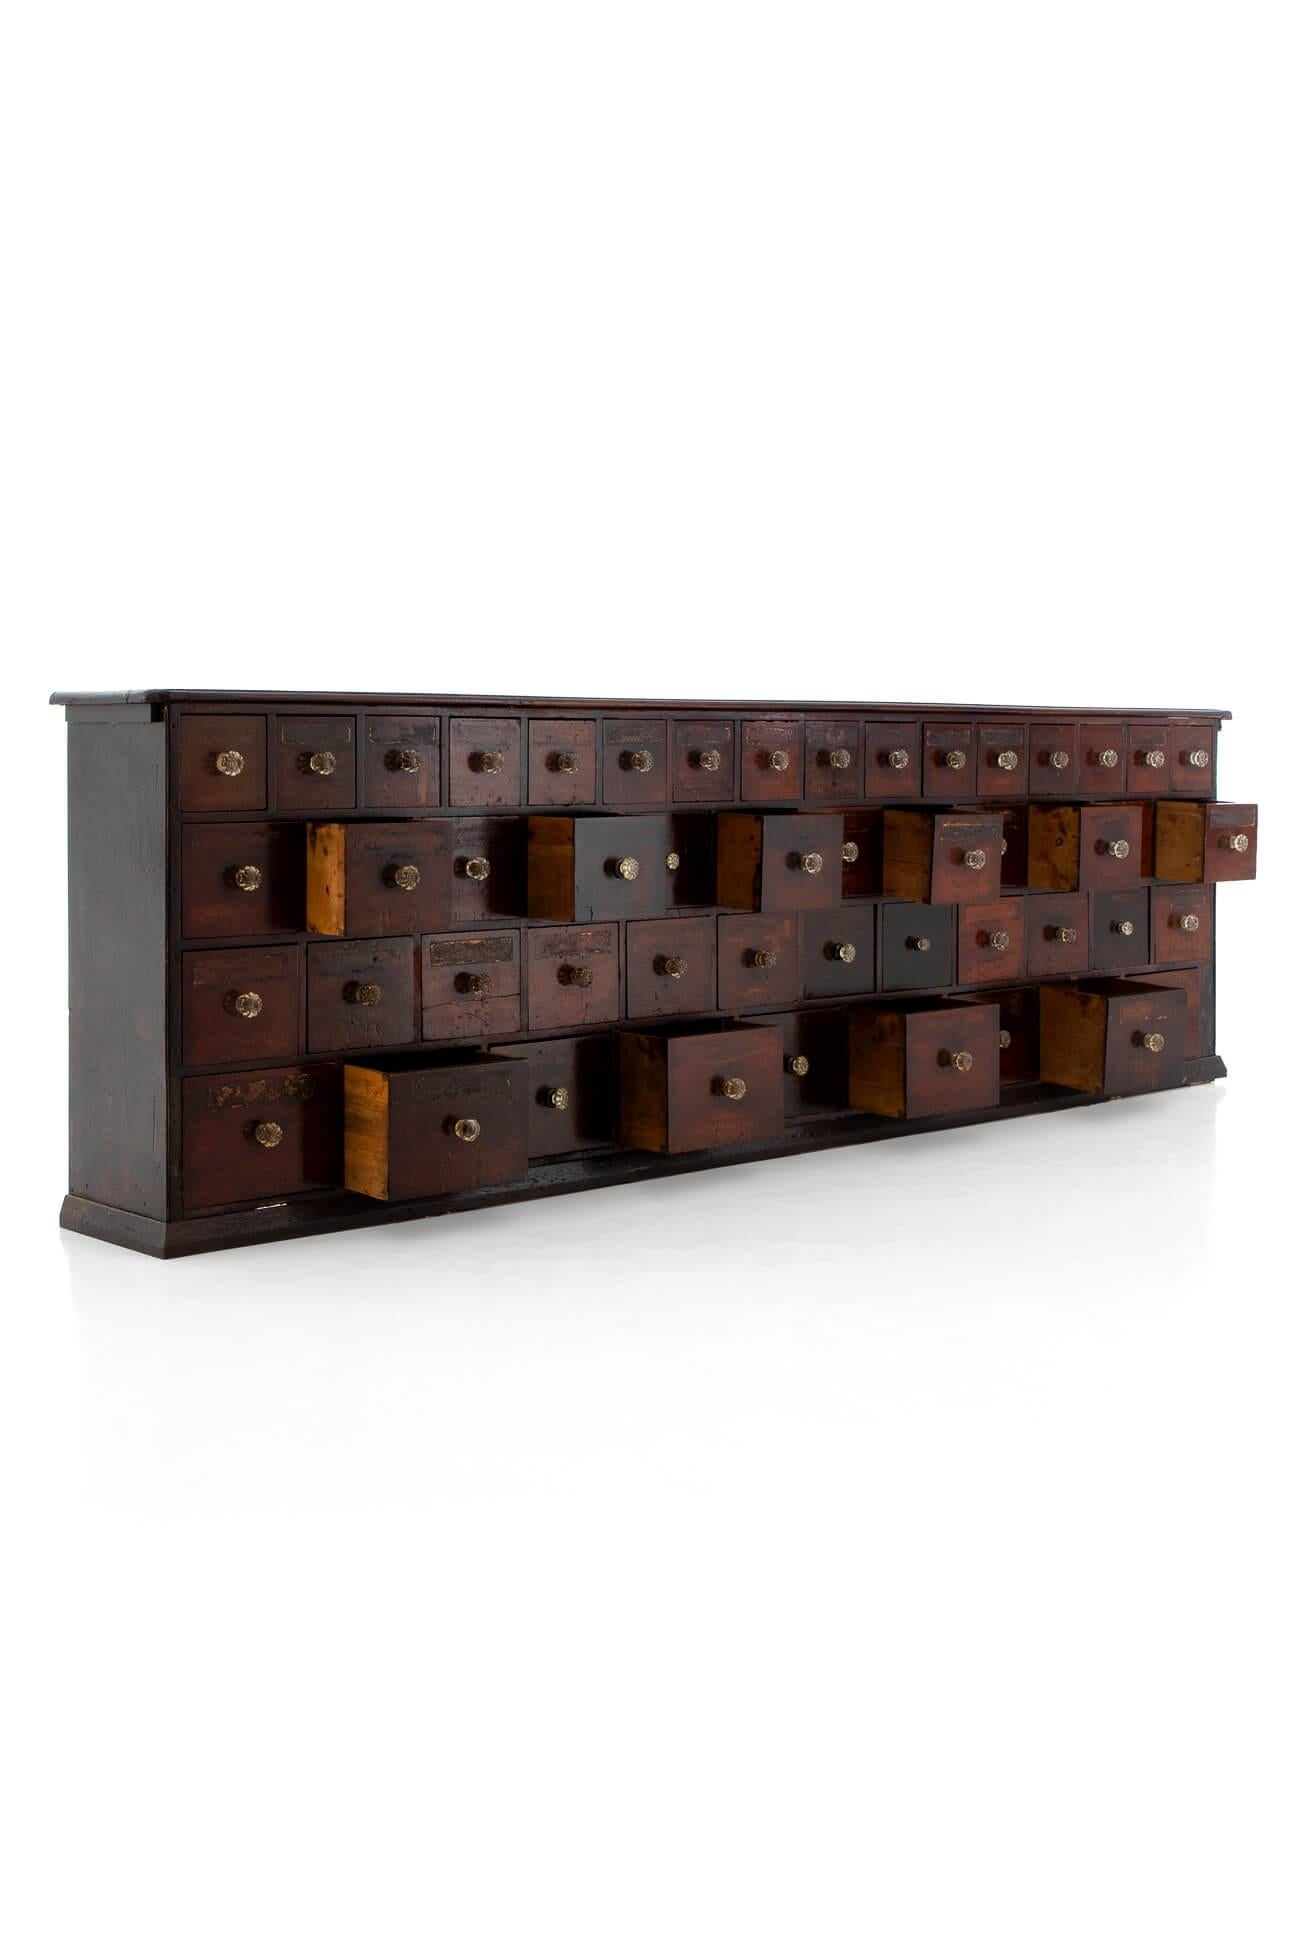 A commanding bank of forty-nine Victorian chemist drawers in mahogany, built by Parnall and Sons of Bristol. Featuring drawers of various sizes with original bevelled glass knobs to each. Sympathetically restored with remnants of original hand